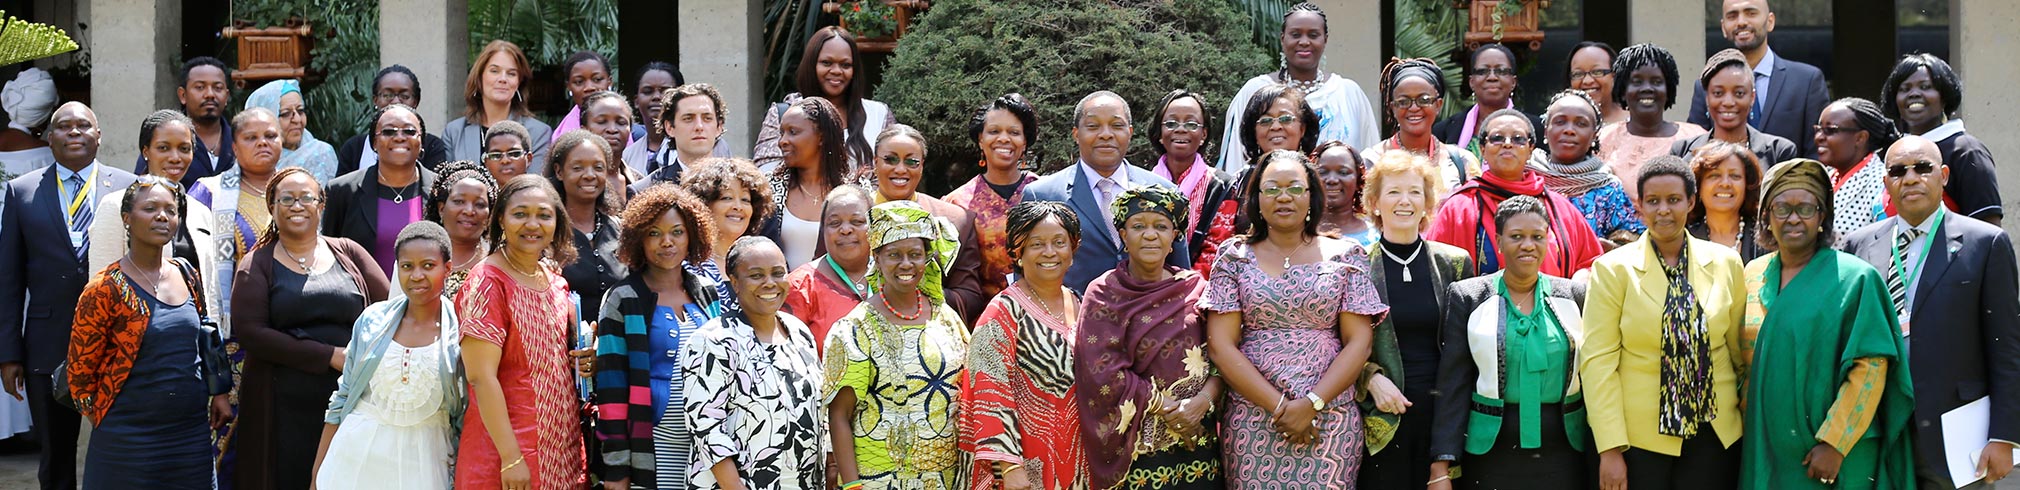 Group photo from the 2014 launch of the Women's Platform for Peace in Addis Ababa